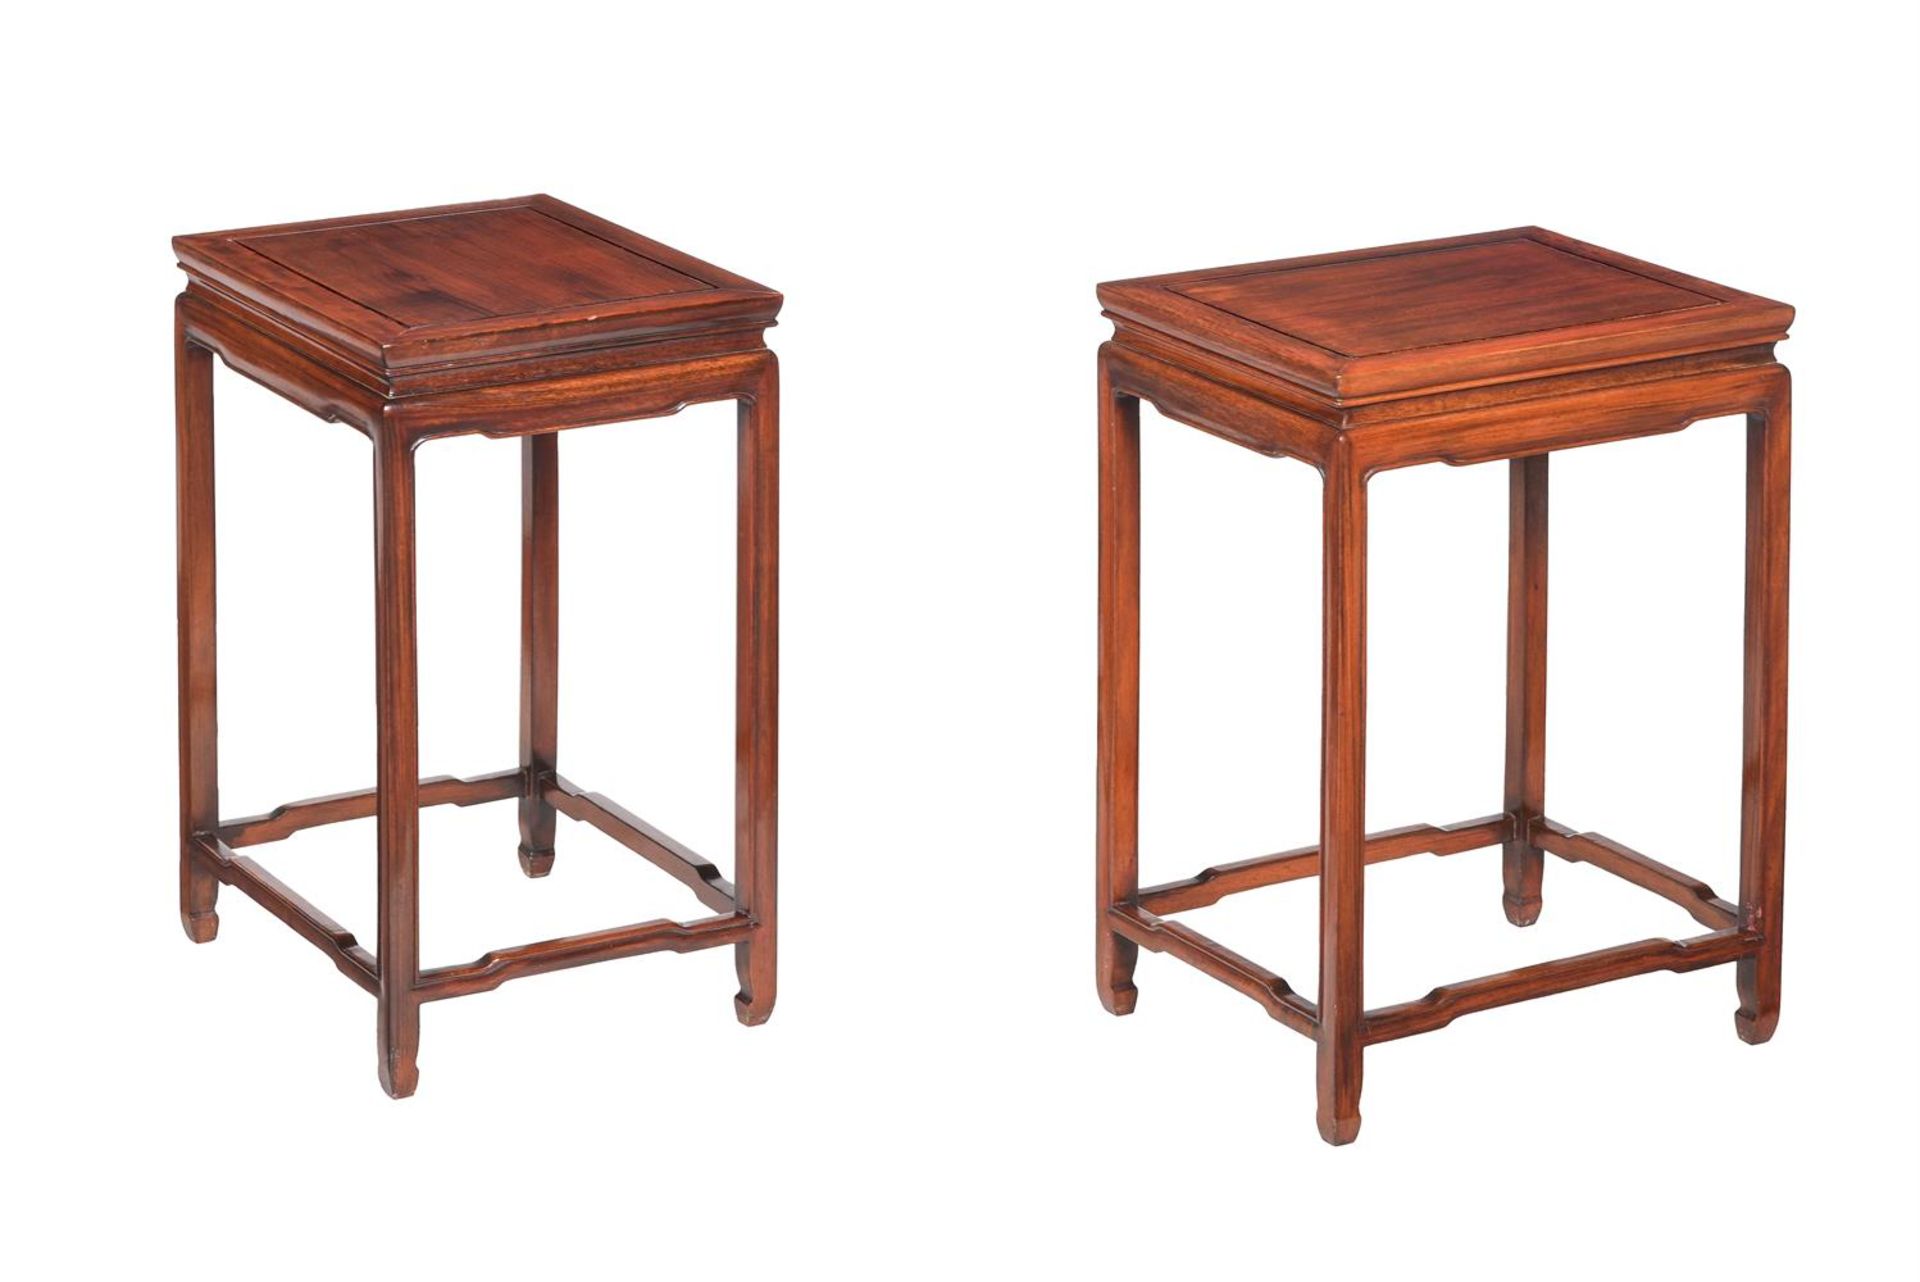 A PAIR OF CHINESE EXOTIC HARDWOOD SIDE TABLES